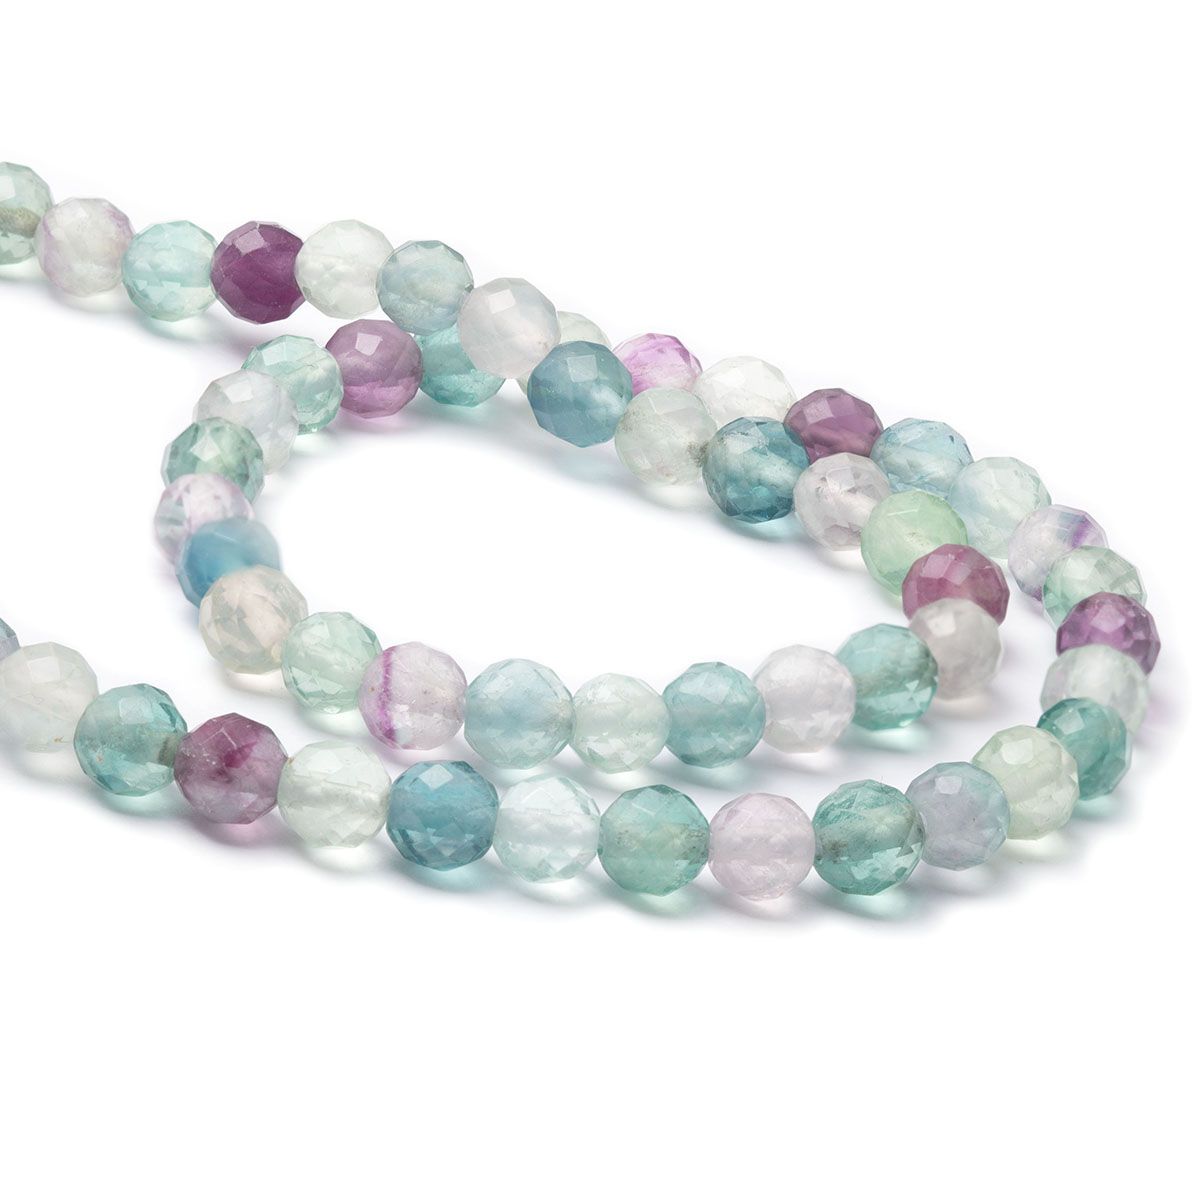 Rainbow Fluorite Faceted Beads - Approx 6mm